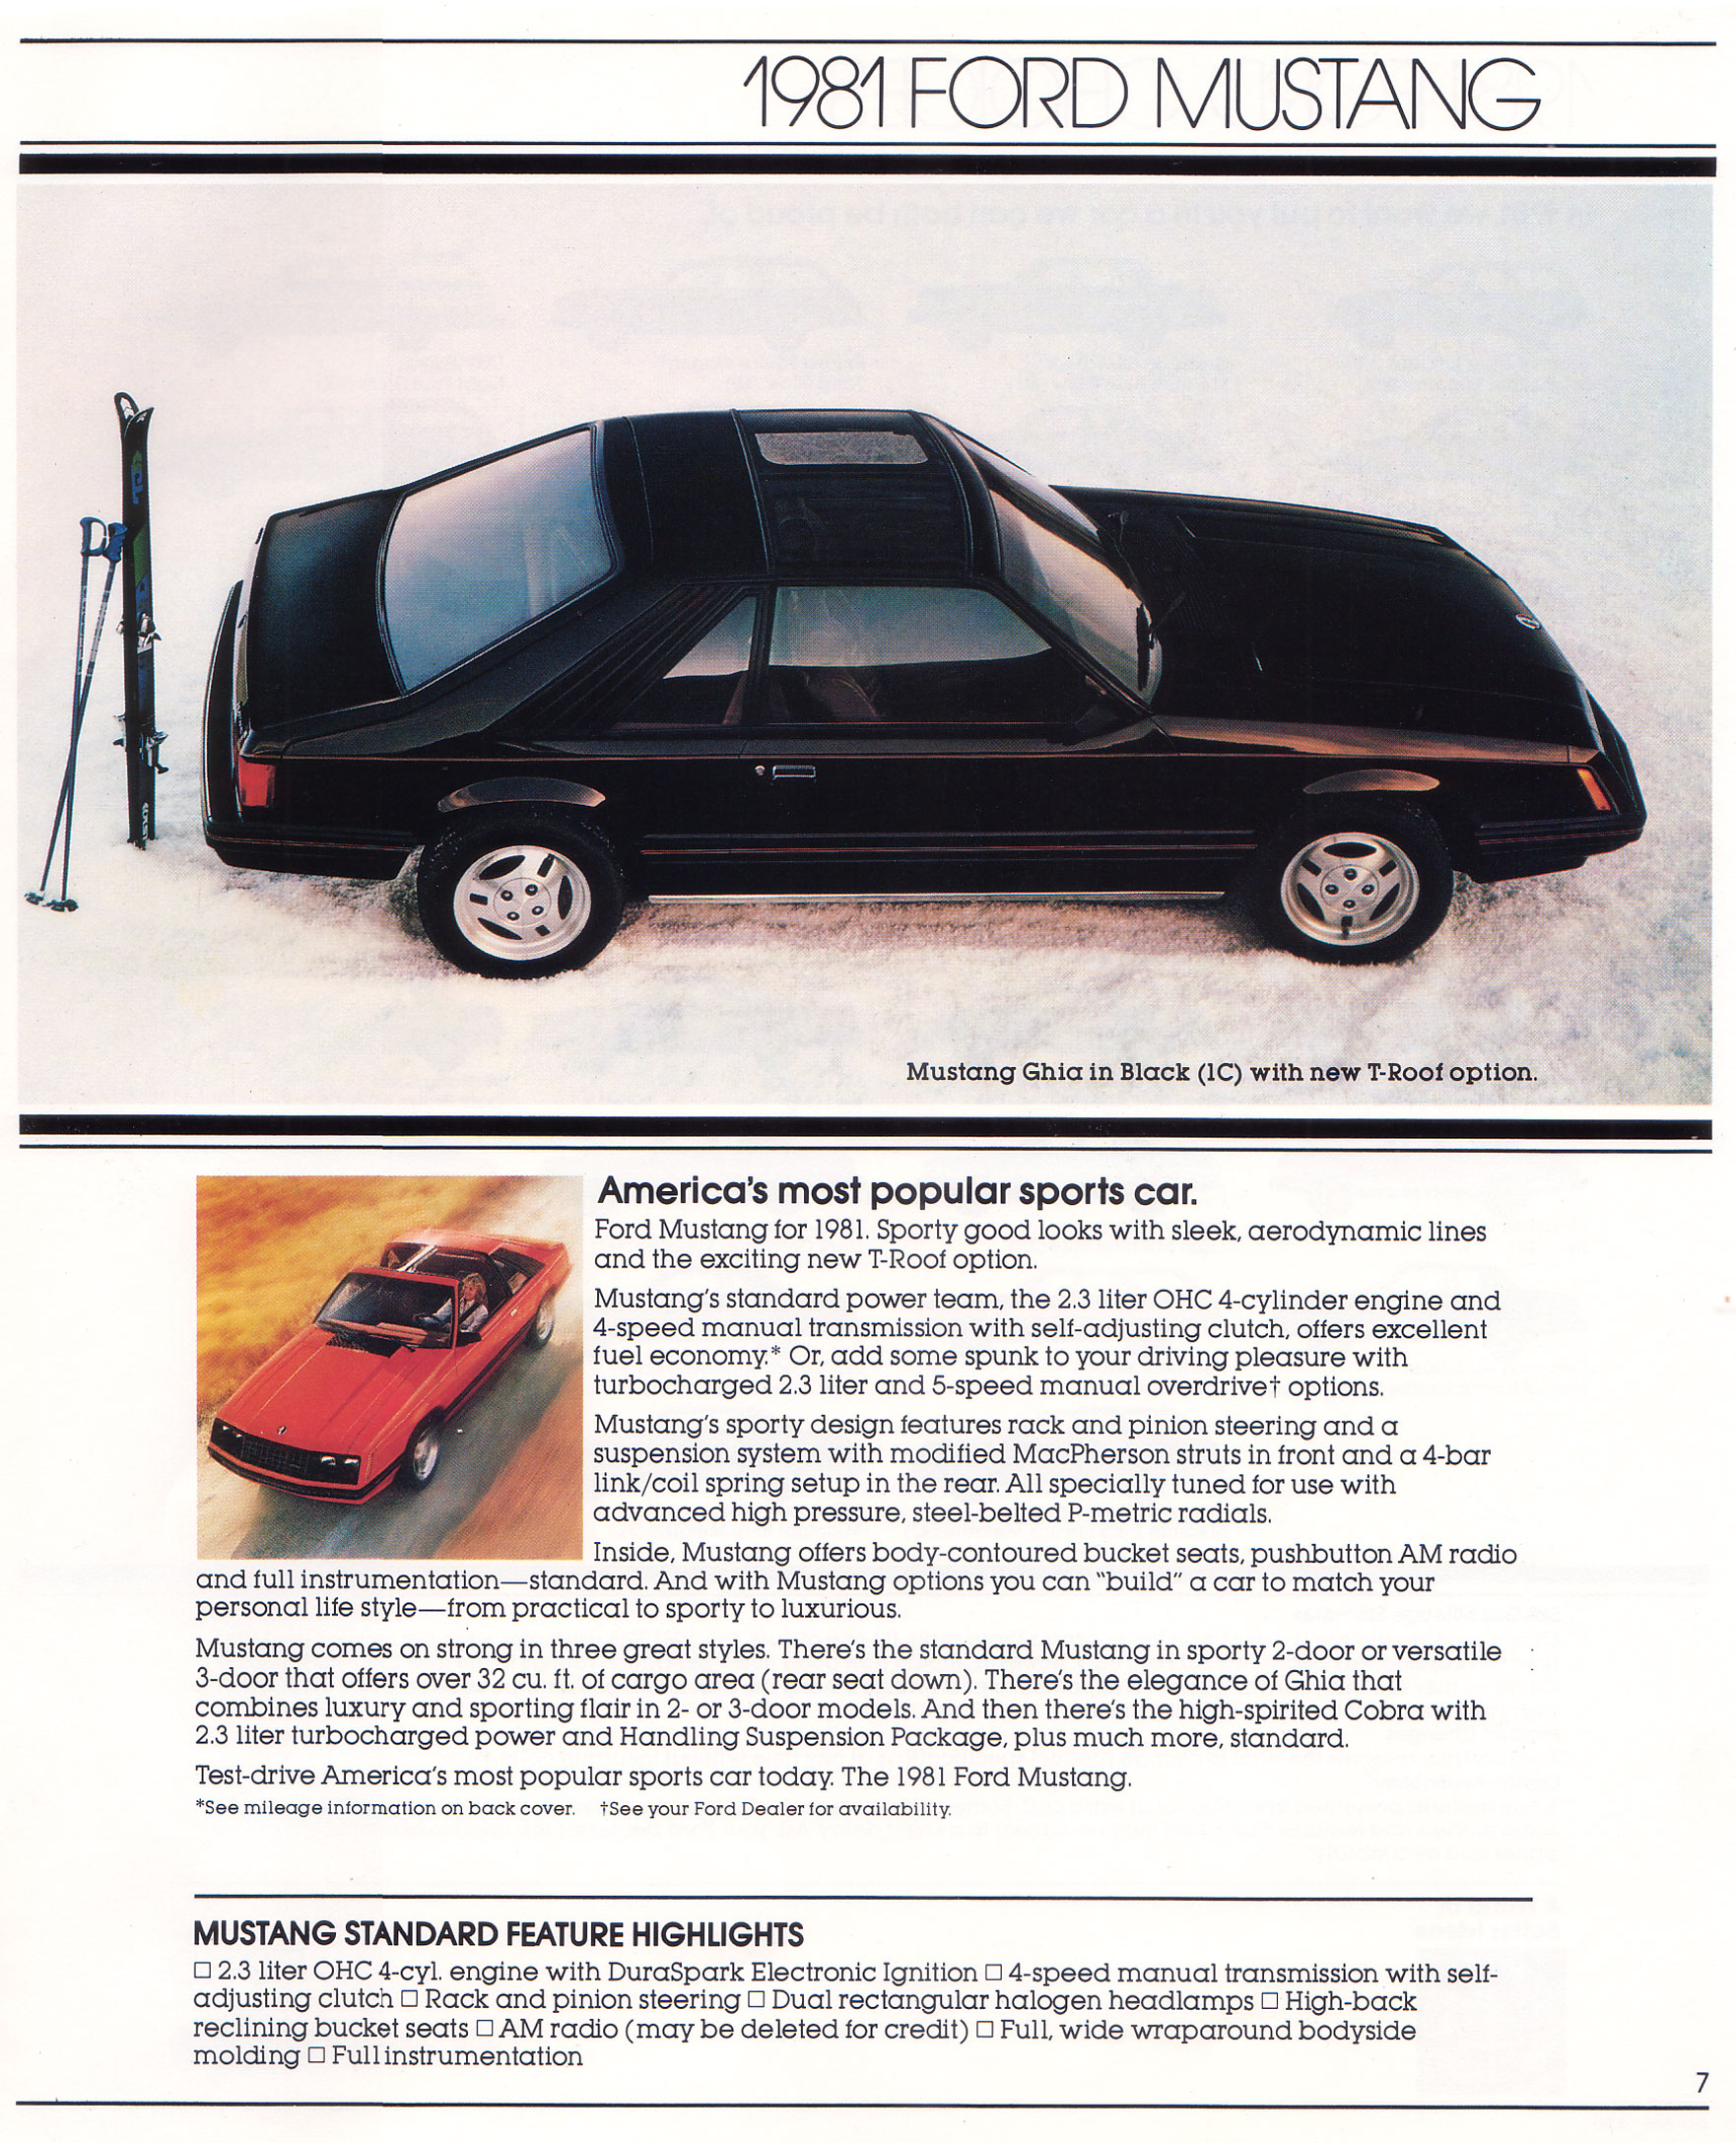 1981 Ford Better Ideas-07